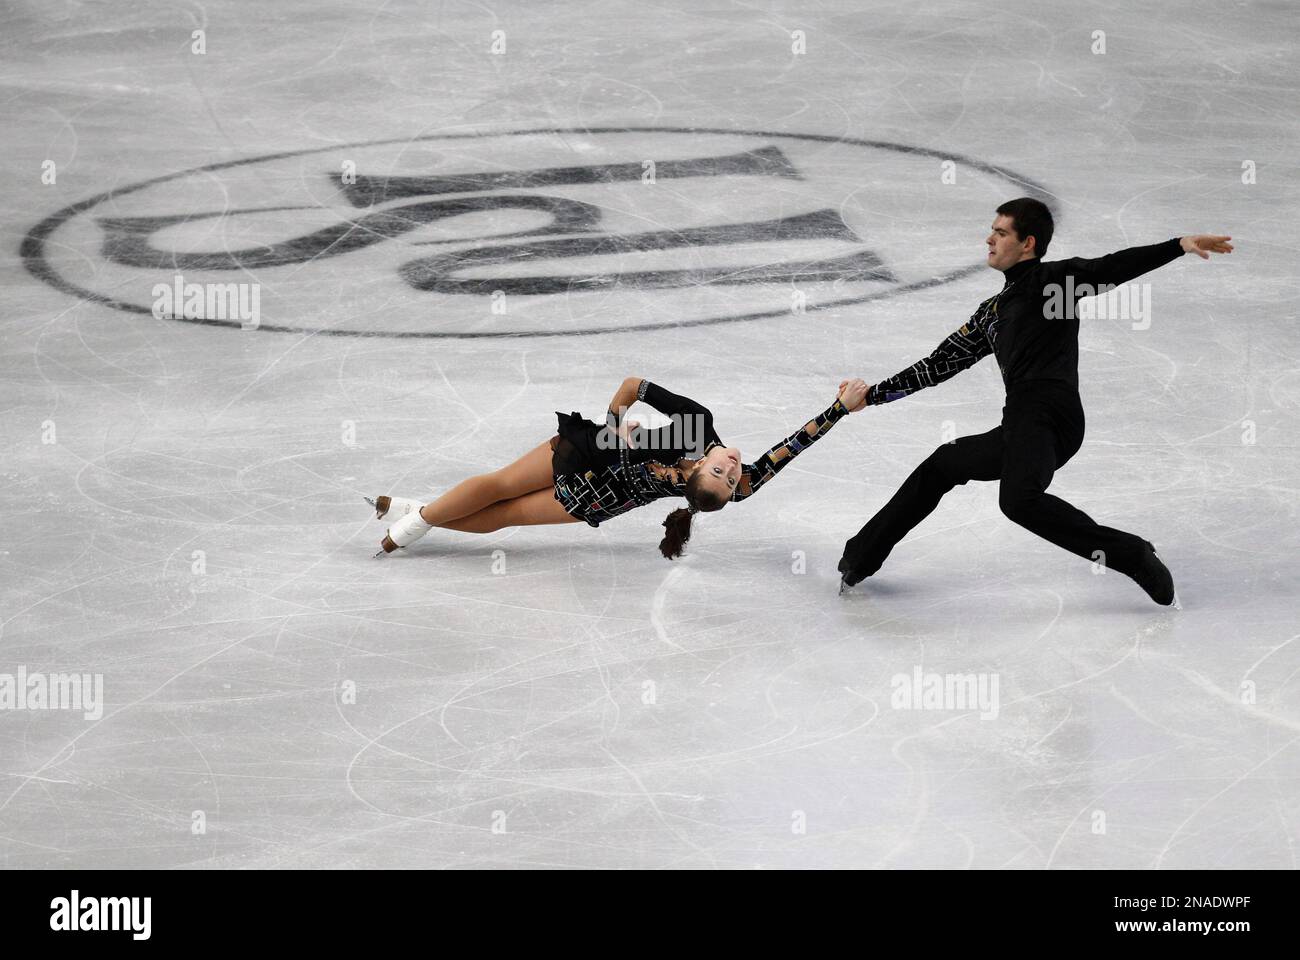 Alexandra Herbrikova and Rudy Halmaert of Czech Republic perform in the  Pairs Free Skating program competition at the European Figure Skating  Championships in Sheffield, England, Thursday, Jan. 26, 2012. (AP Photo/Jon  Super